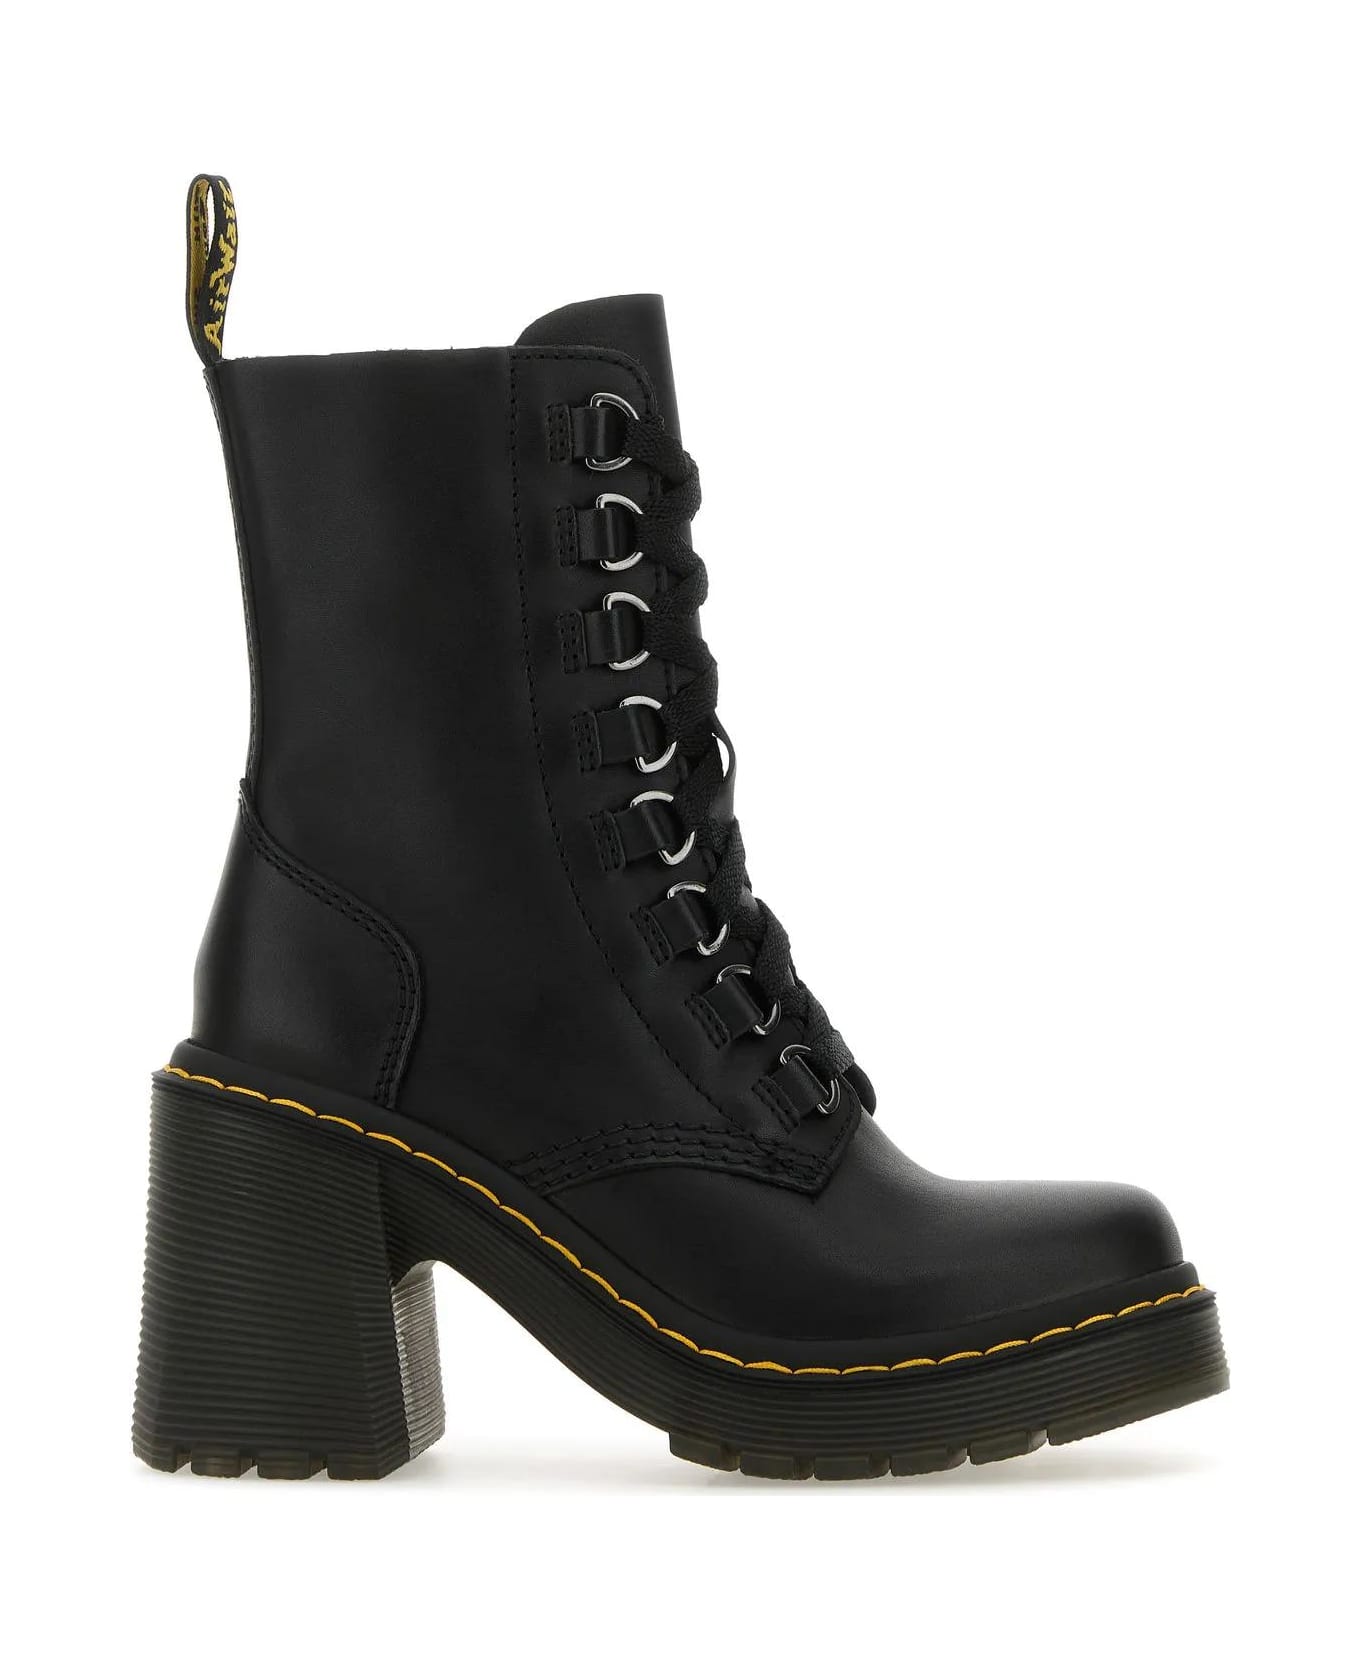 Dr. Martens Chesney Ankle Boots ブーツ